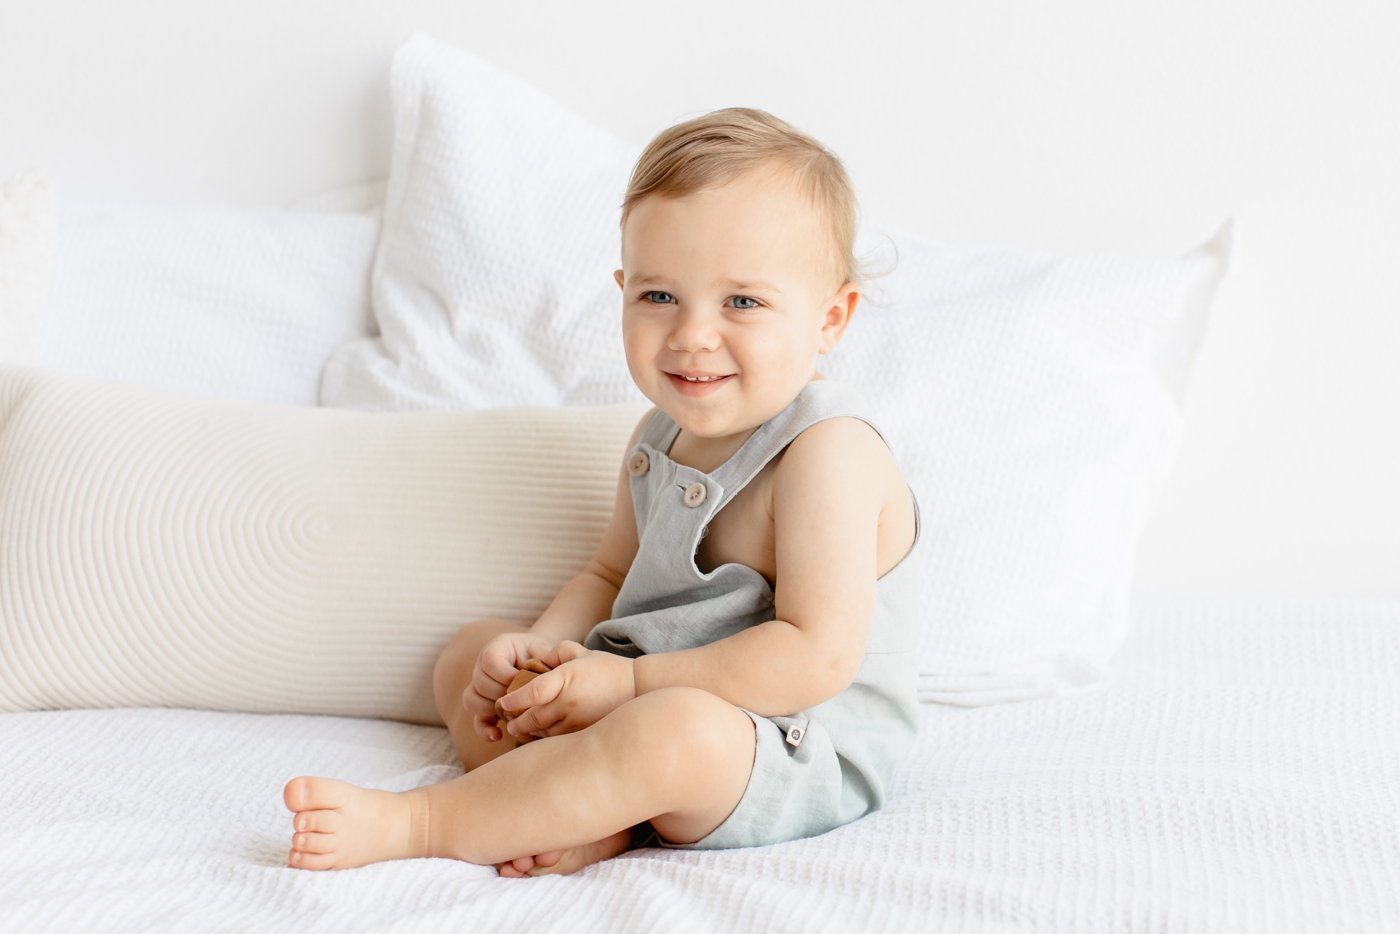 Toddler boy smiling at camera on bed. Photo by Sana Ahmed Photography.